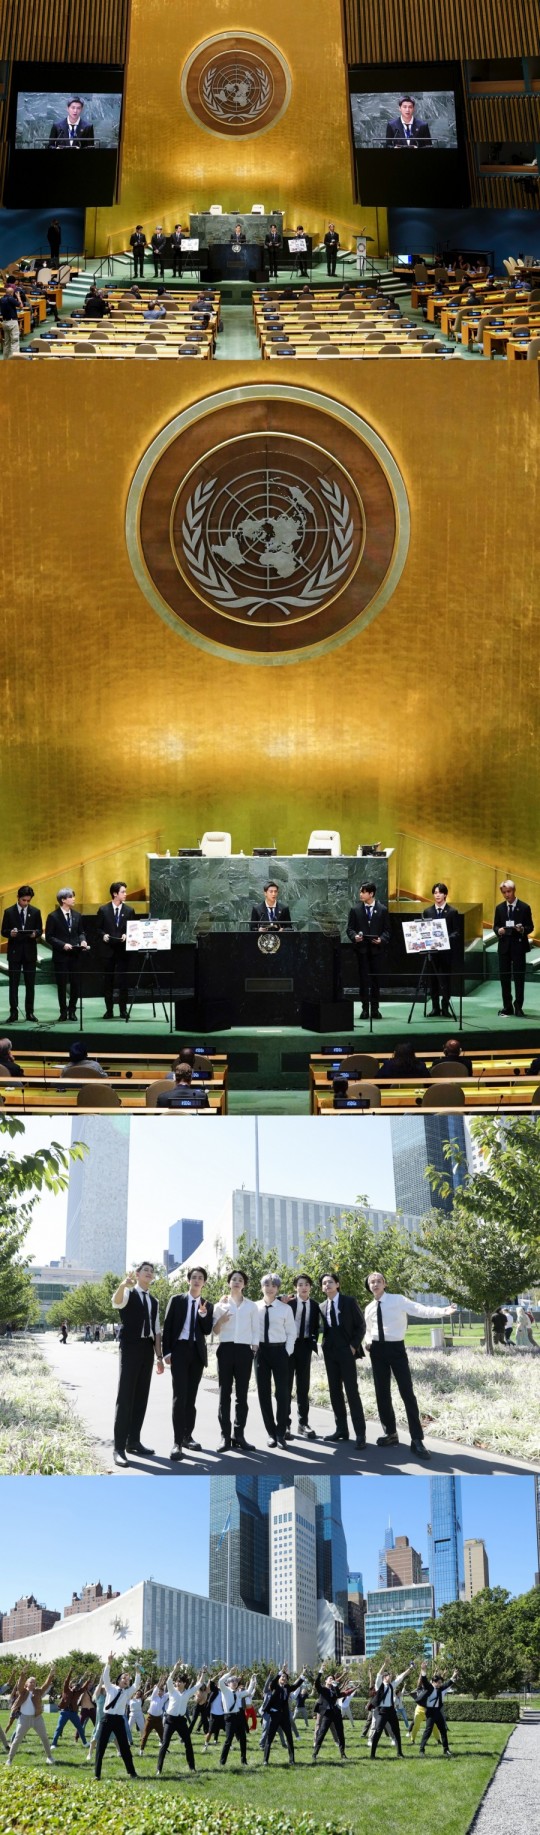 BTS Suga gave a stinging step to the crooked viewers regarding his speech at the United Nations General Assembly.Suga said, I have a lot of words about What are you doing there because you are a singer?Weve also been speaking to promote and promote the Sustainable Development Goals (SDGs). We dont have to wear glasses too much, we know all about it and weve gone to that role, he said.He also mentioned that the number of viewers who relayed the United Nations General Assembly at the time was high due to BTS.Suga said, People have limited ratings for the United Nations General Assembly, and the number of views has increased as we attended.If you have seen a lot of people, I think you have done our part, he said.Indeed, according to the New York City Times and Washington Poster, more than a million people watched in real time the scene BTS spoke at the United Nations General Assembly at the time.Suga appears to have explained the positive impact of BTS on this.Earlier, BTS spoke about young people and future generations at the opening session of the 76th United Nations General Assembly SEK event, Sustainable Development Goals (SDG) Moment held in the United States on the 20th, and introduced stories of young people who are trying to live healthier in Only.BTS, which will speak at United Nations for the third time this year following 2018 and 2020, has now acted as a messenger to convey the voices of future generations to all Worlds.Following the speech, he also performed the song Permission to Dance, which was released on July 9, starting at the United Nations General Assembly meeting hall, followed by the lobby of the General Assembly, the entrance to the Government building, and the grass plaza.Foreign media such as the New York City Times, Washington Post, Billboards, Mashable, Rolling Stone, Variety, and Teen Vogue focused on BTSs United Nations General Assembly speech and performance.President Moon Jae-in, who appointed BTS as SEK envoy, said, BTS is the best artist and has conveyed a message of sympathy and hope to young people in World suffering from Only.